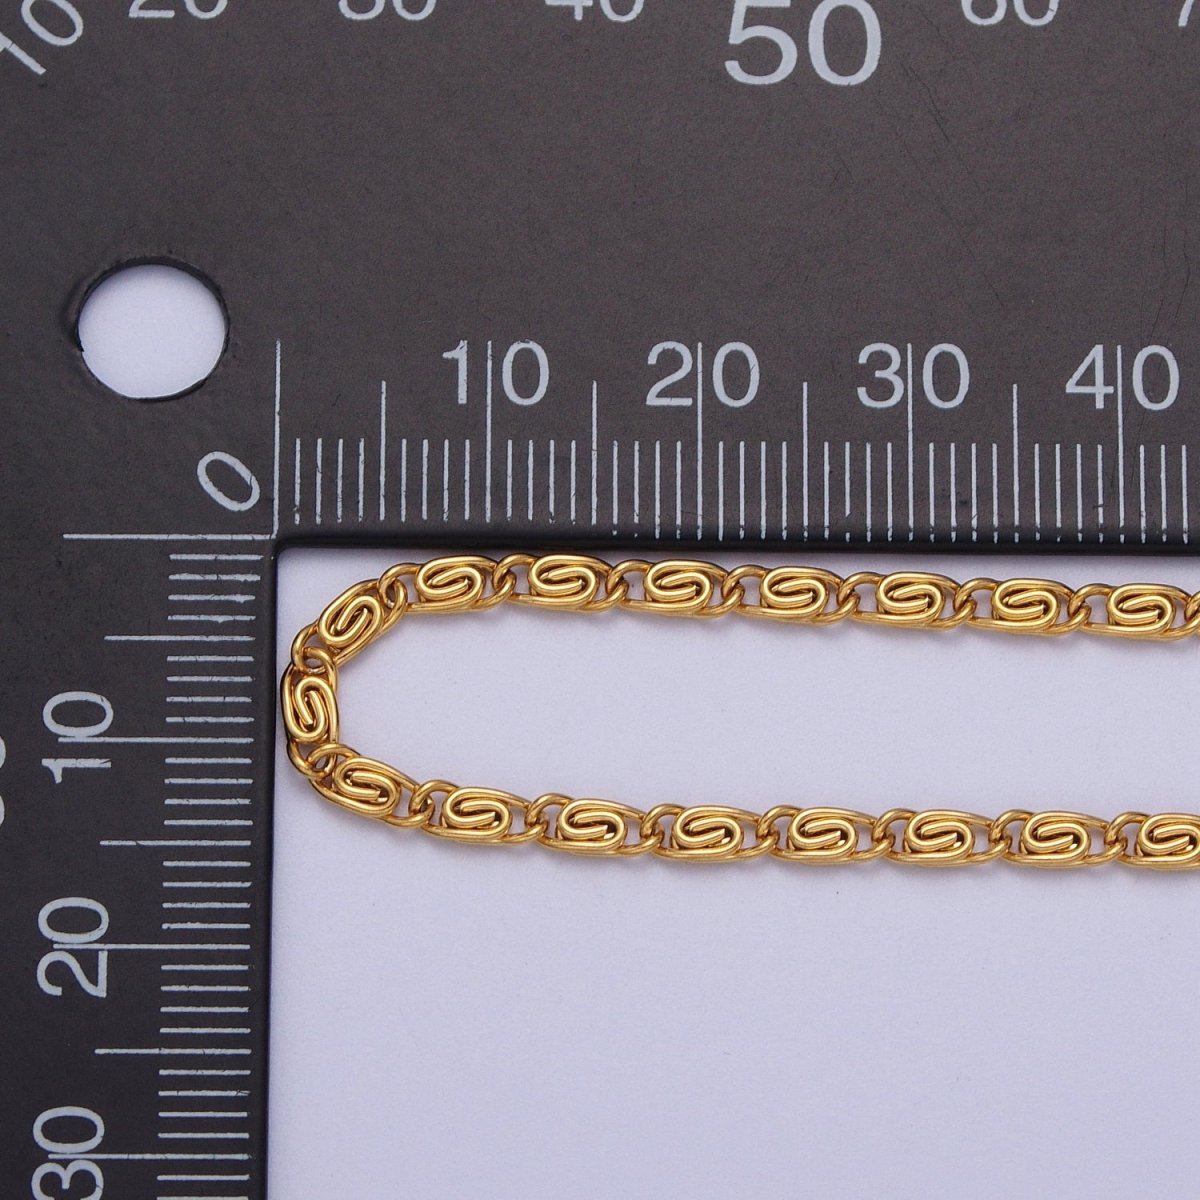 24k Gold Filled 2.6mm Gold & Silver Scroll Chain in 16, 18, 20 Inch Length Necklace | WA-1482 to WA-1489 Clearance Pricing - DLUXCA